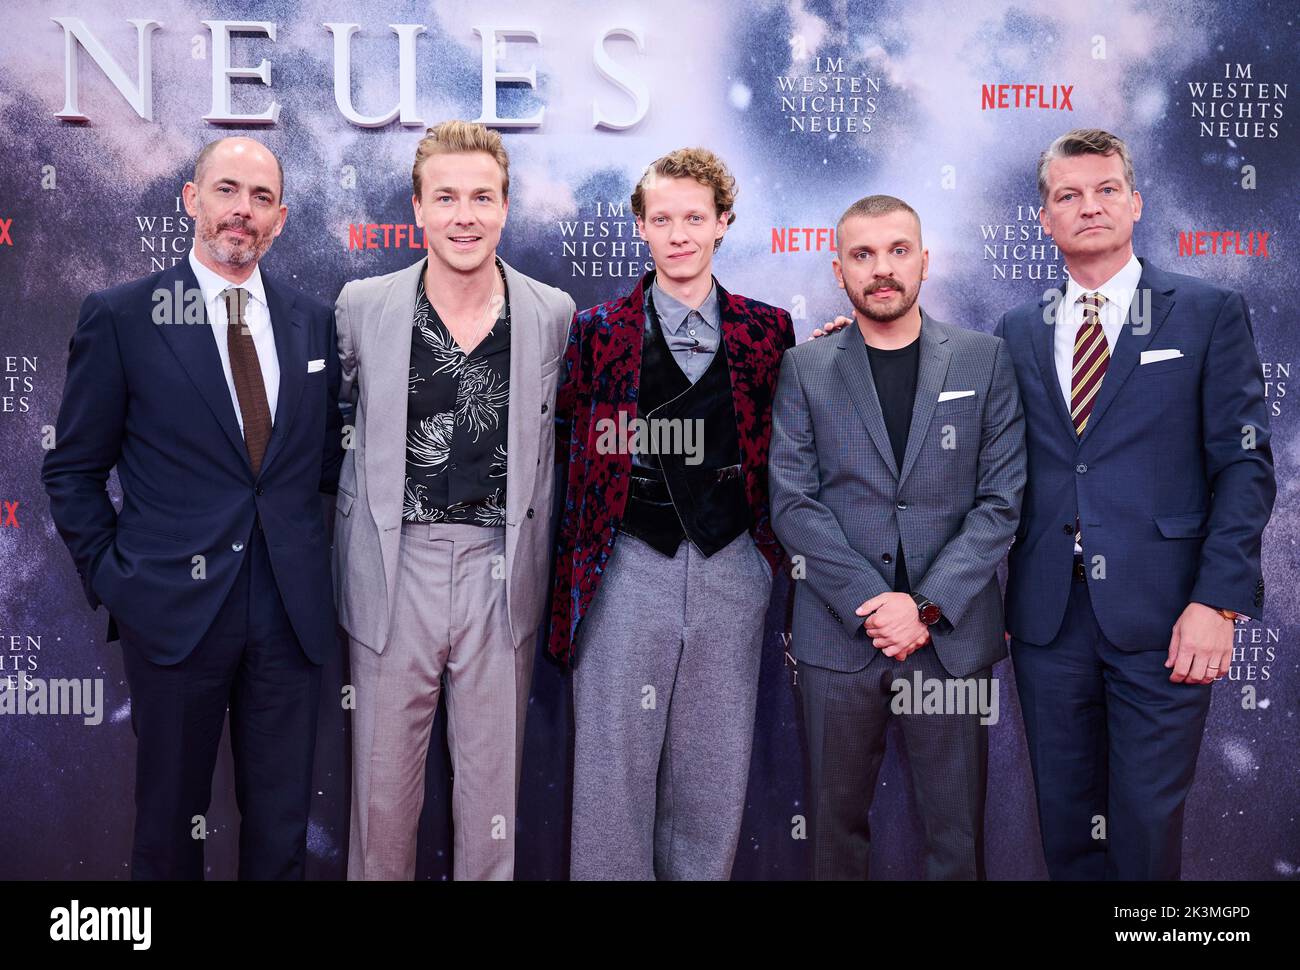 Berlin, Germany. 27th Sep, 2022. Edward Berger (l-r), film director, actors Albrecht Schuch, Felix Kammerer, Edin Hasanovic and Malte Grunert, film producer come to the premiere of their film 'Nothing New in the West' at Kino International. Credit: Annette Riedl/dpa/Alamy Live News Stock Photo